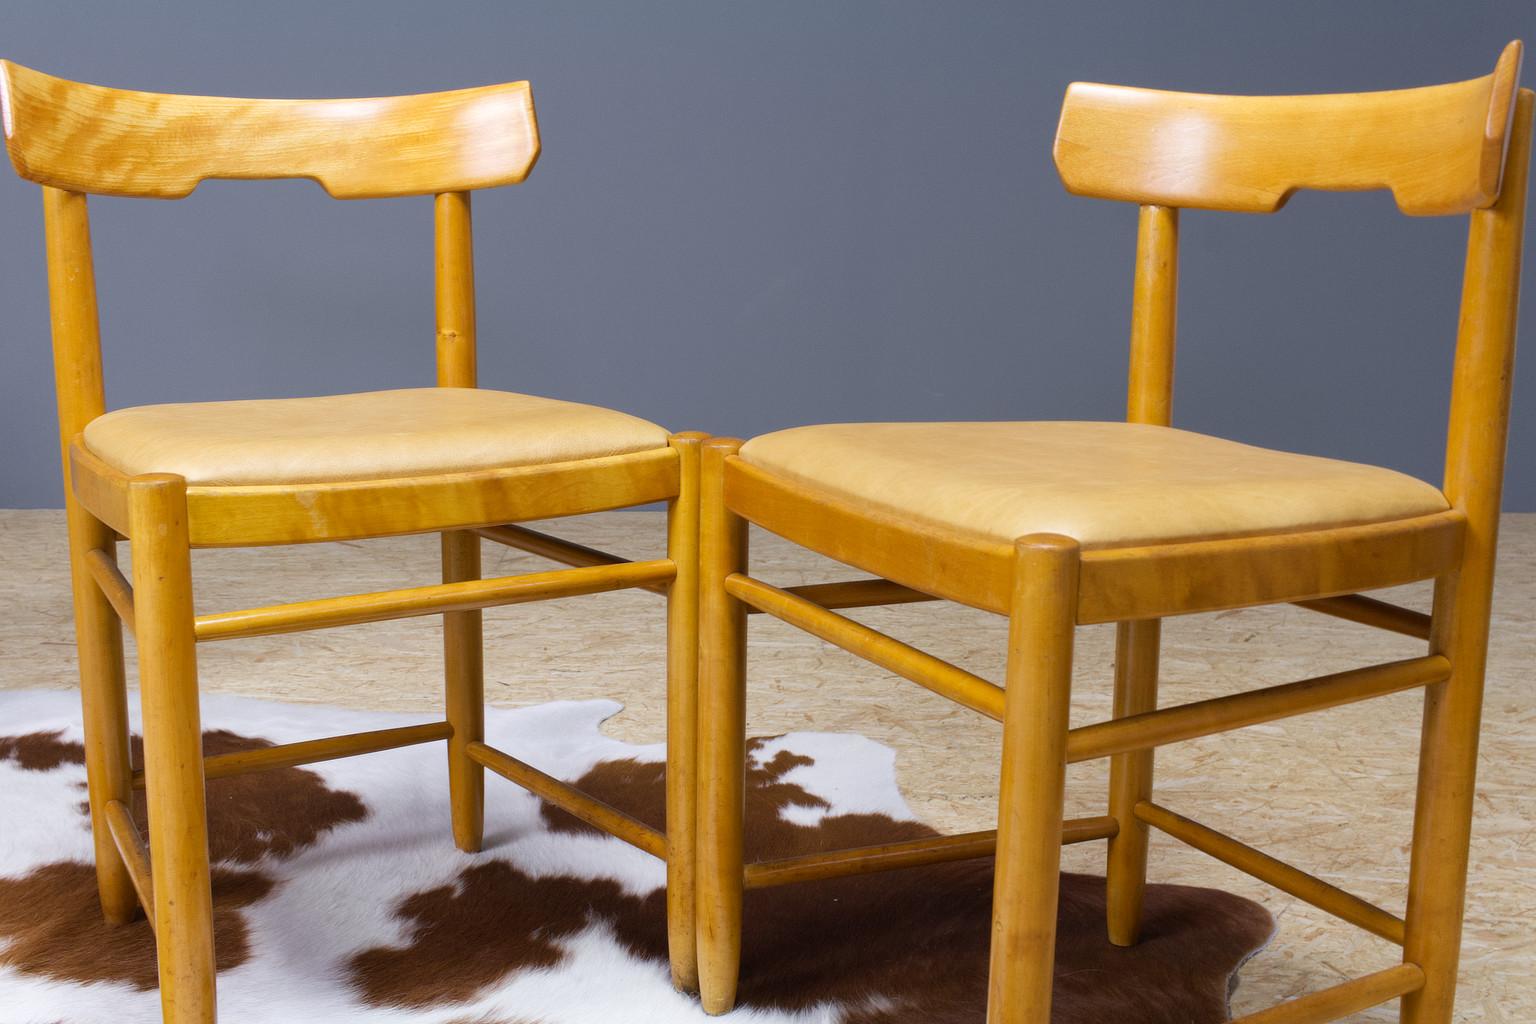 Scandinavian Modern Dining Chairs in Beech and Tan Leather, 1960s Set of 4 For Sale 2